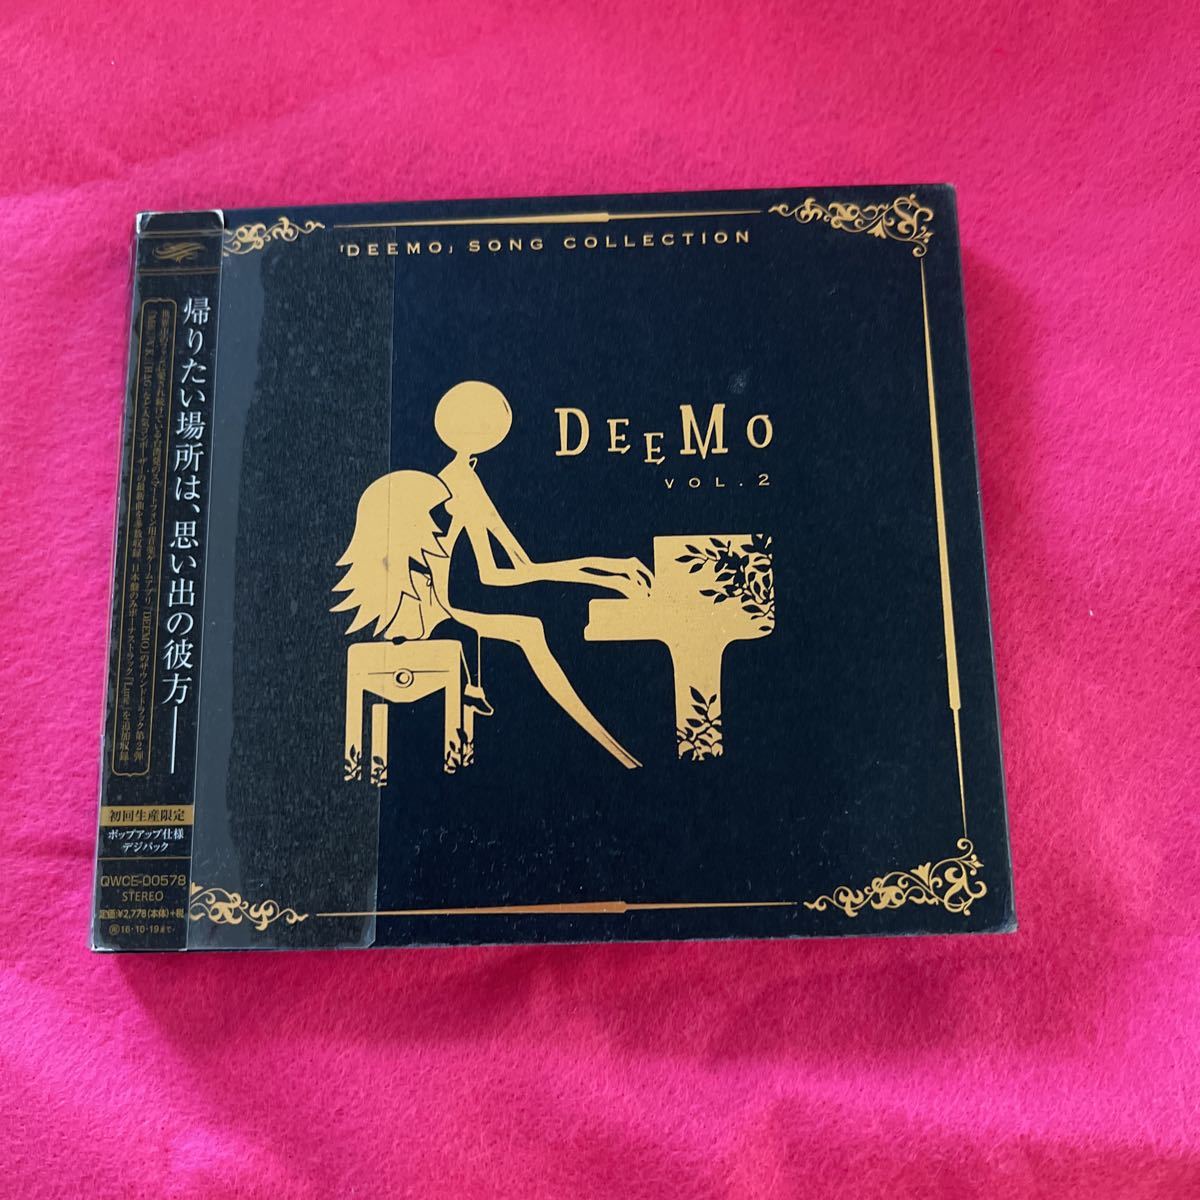 「DEEMO」SONG COLLECTION VOL.2 ゲーム・サントラ 形式: CD　22.5.30_画像1